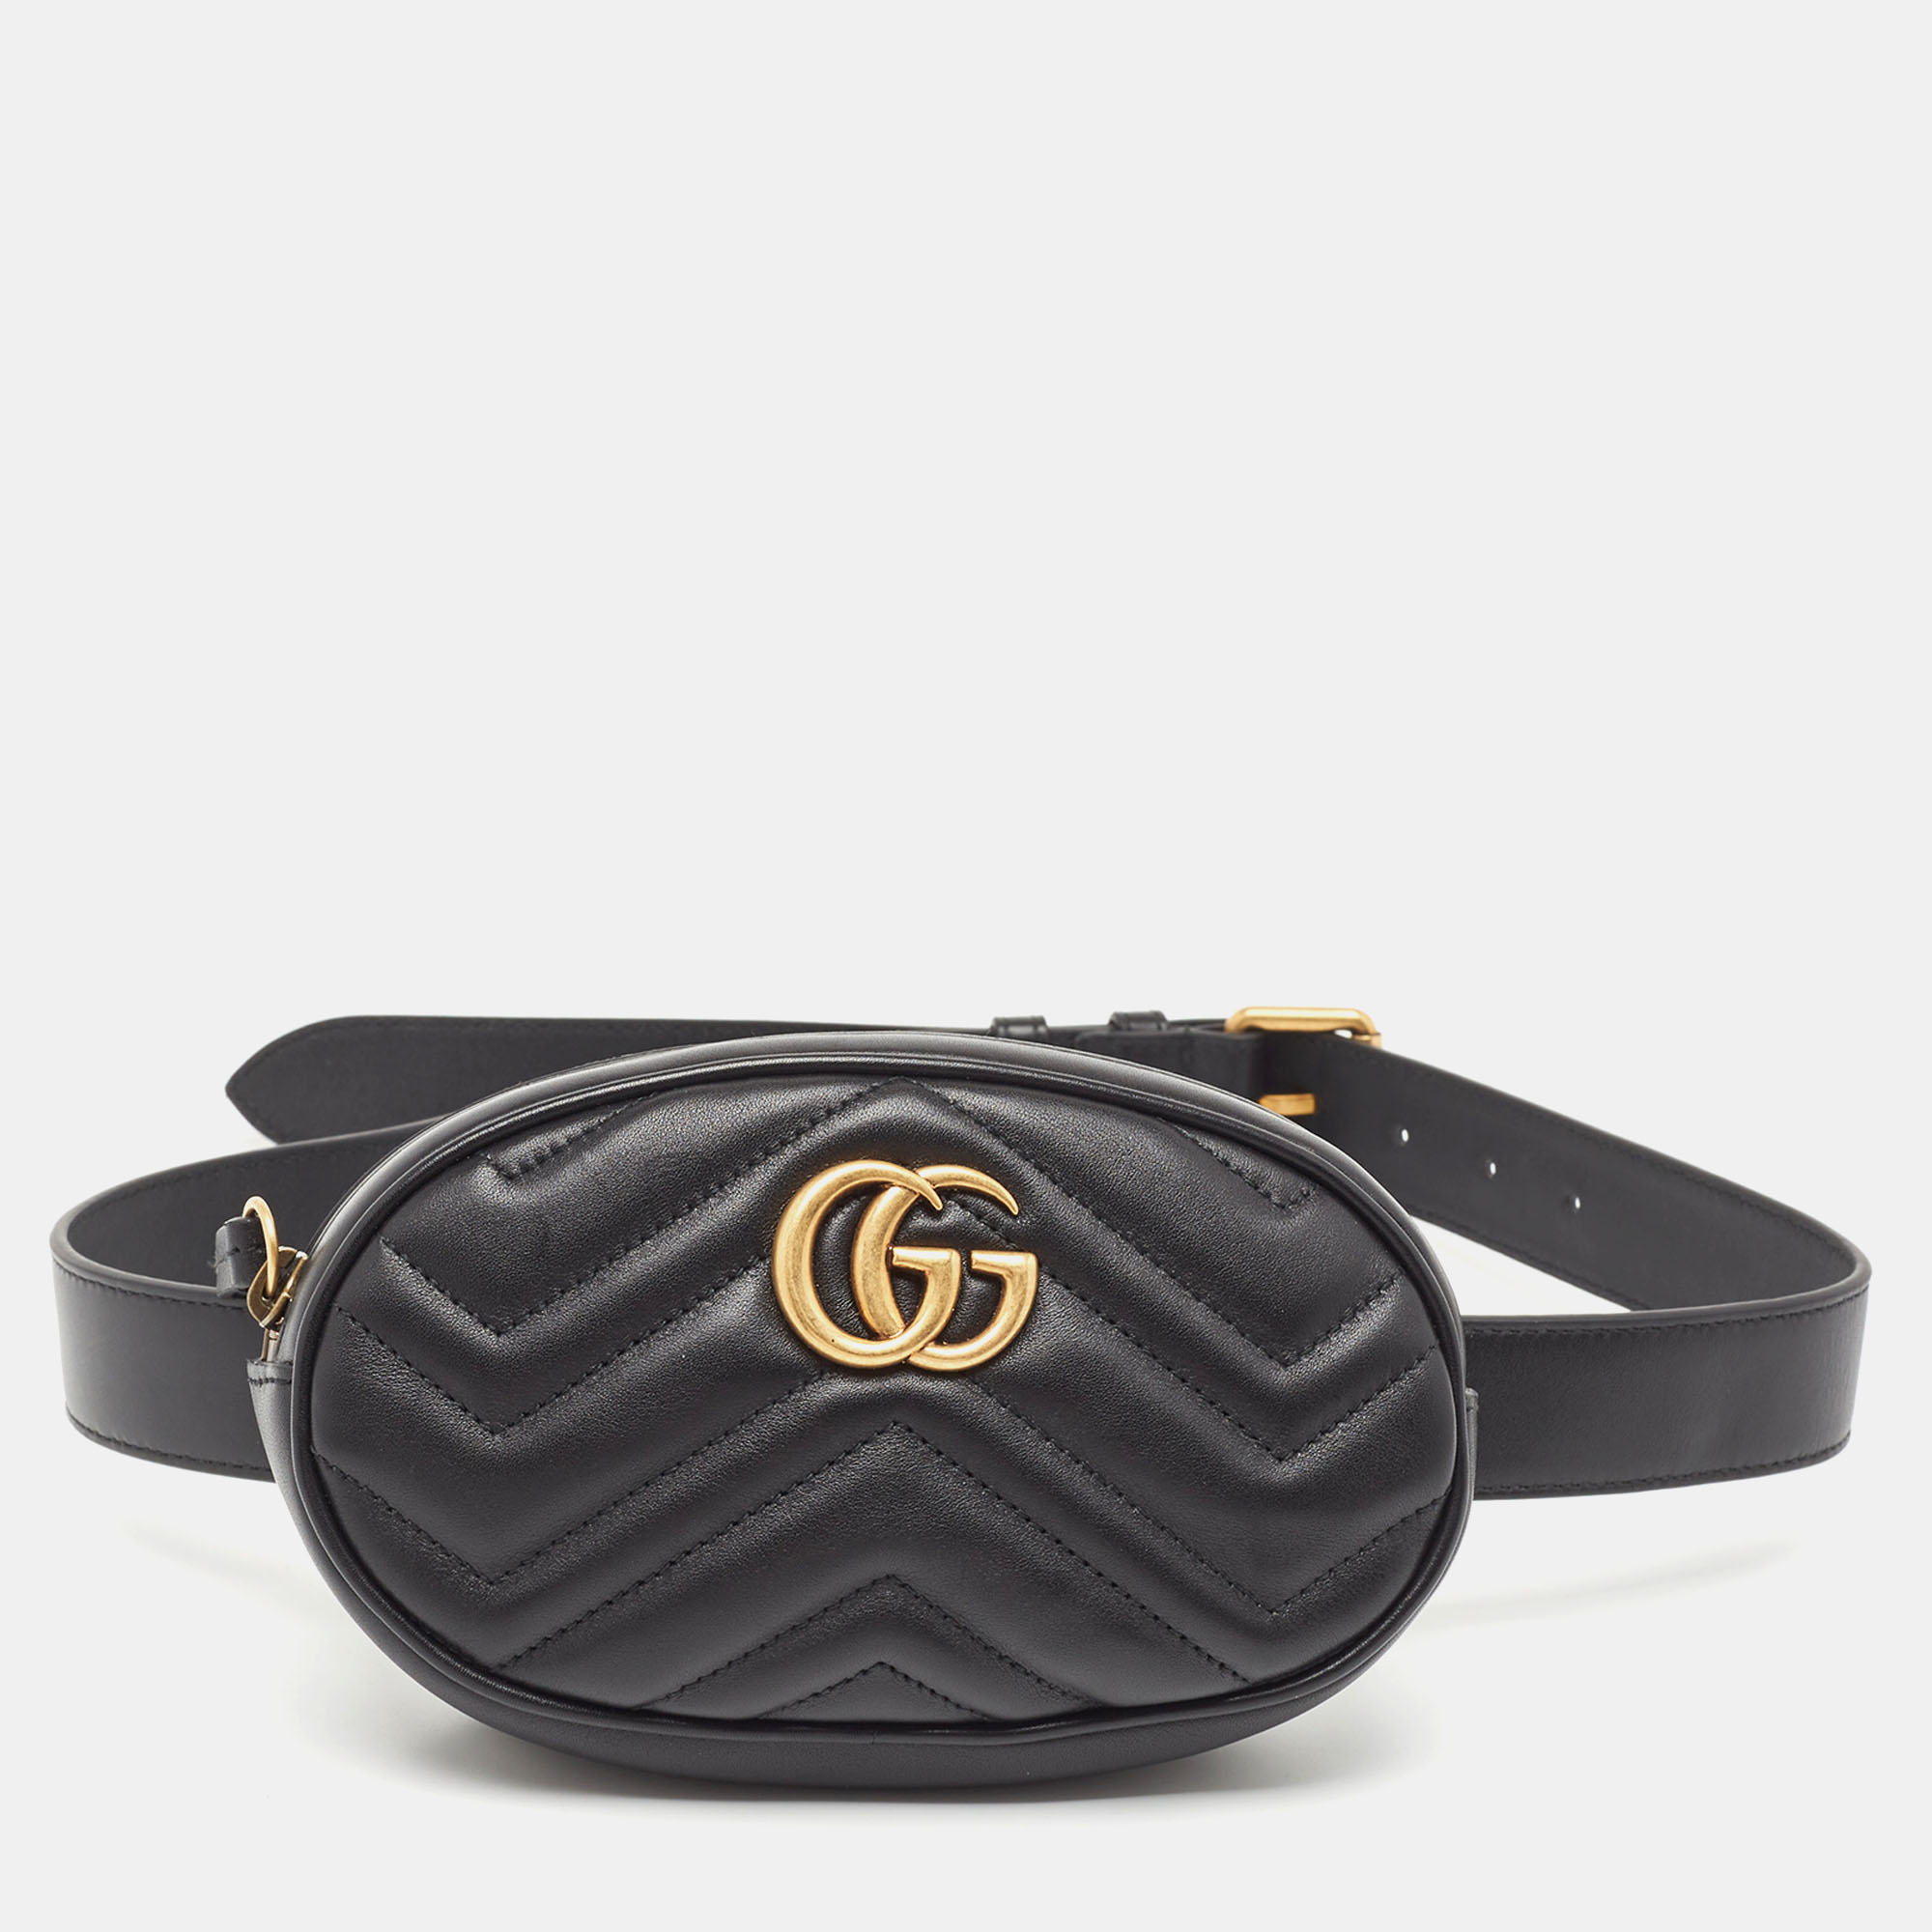 Innovative and sophisticated this Gucci Marmont belt bag evokes a sense of classic glamour. Finely crafted from matelassé leather it gets a luxe update with the double G motif on the front and features a perfectly sized interior. The strap will lend you the perfect fit around the waist and the gold tone accents make it undeniably chic.